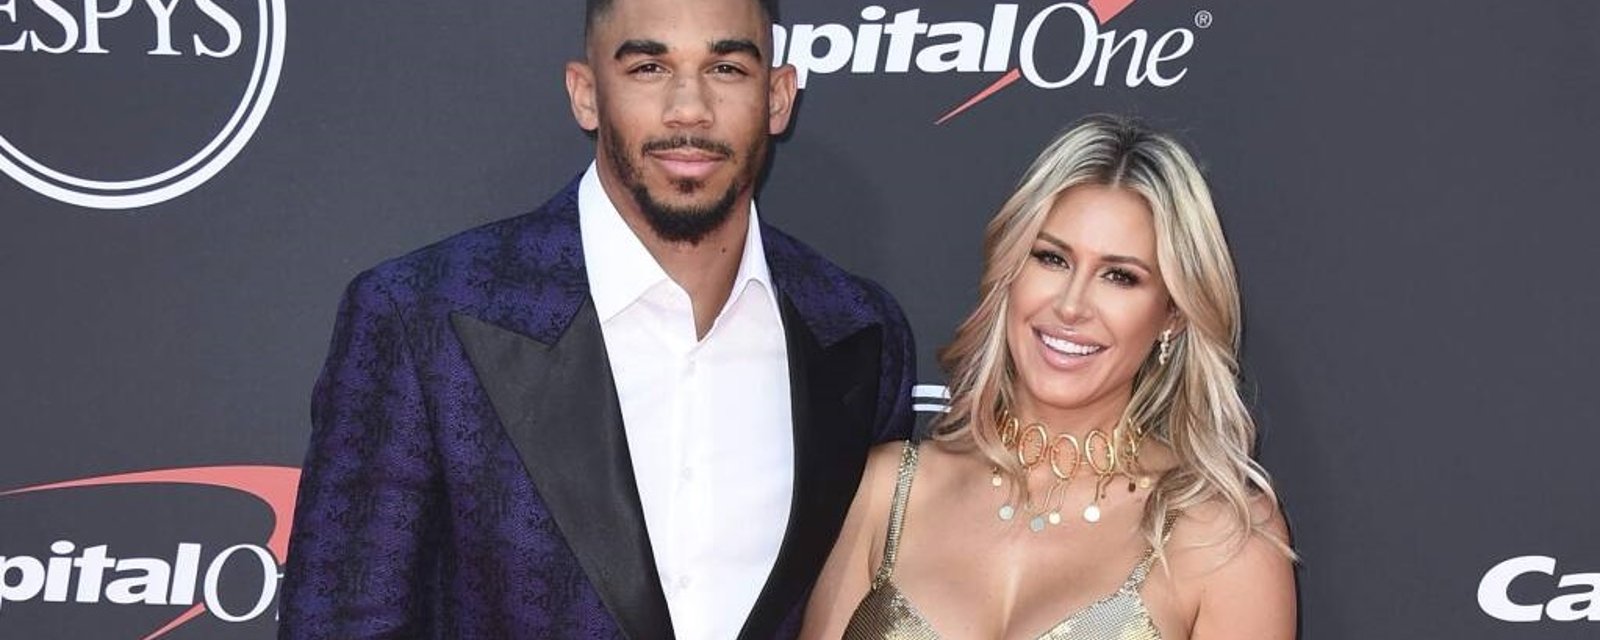 Evander Kane's wife unloads after he accuses her of being 'mentally unwell.'